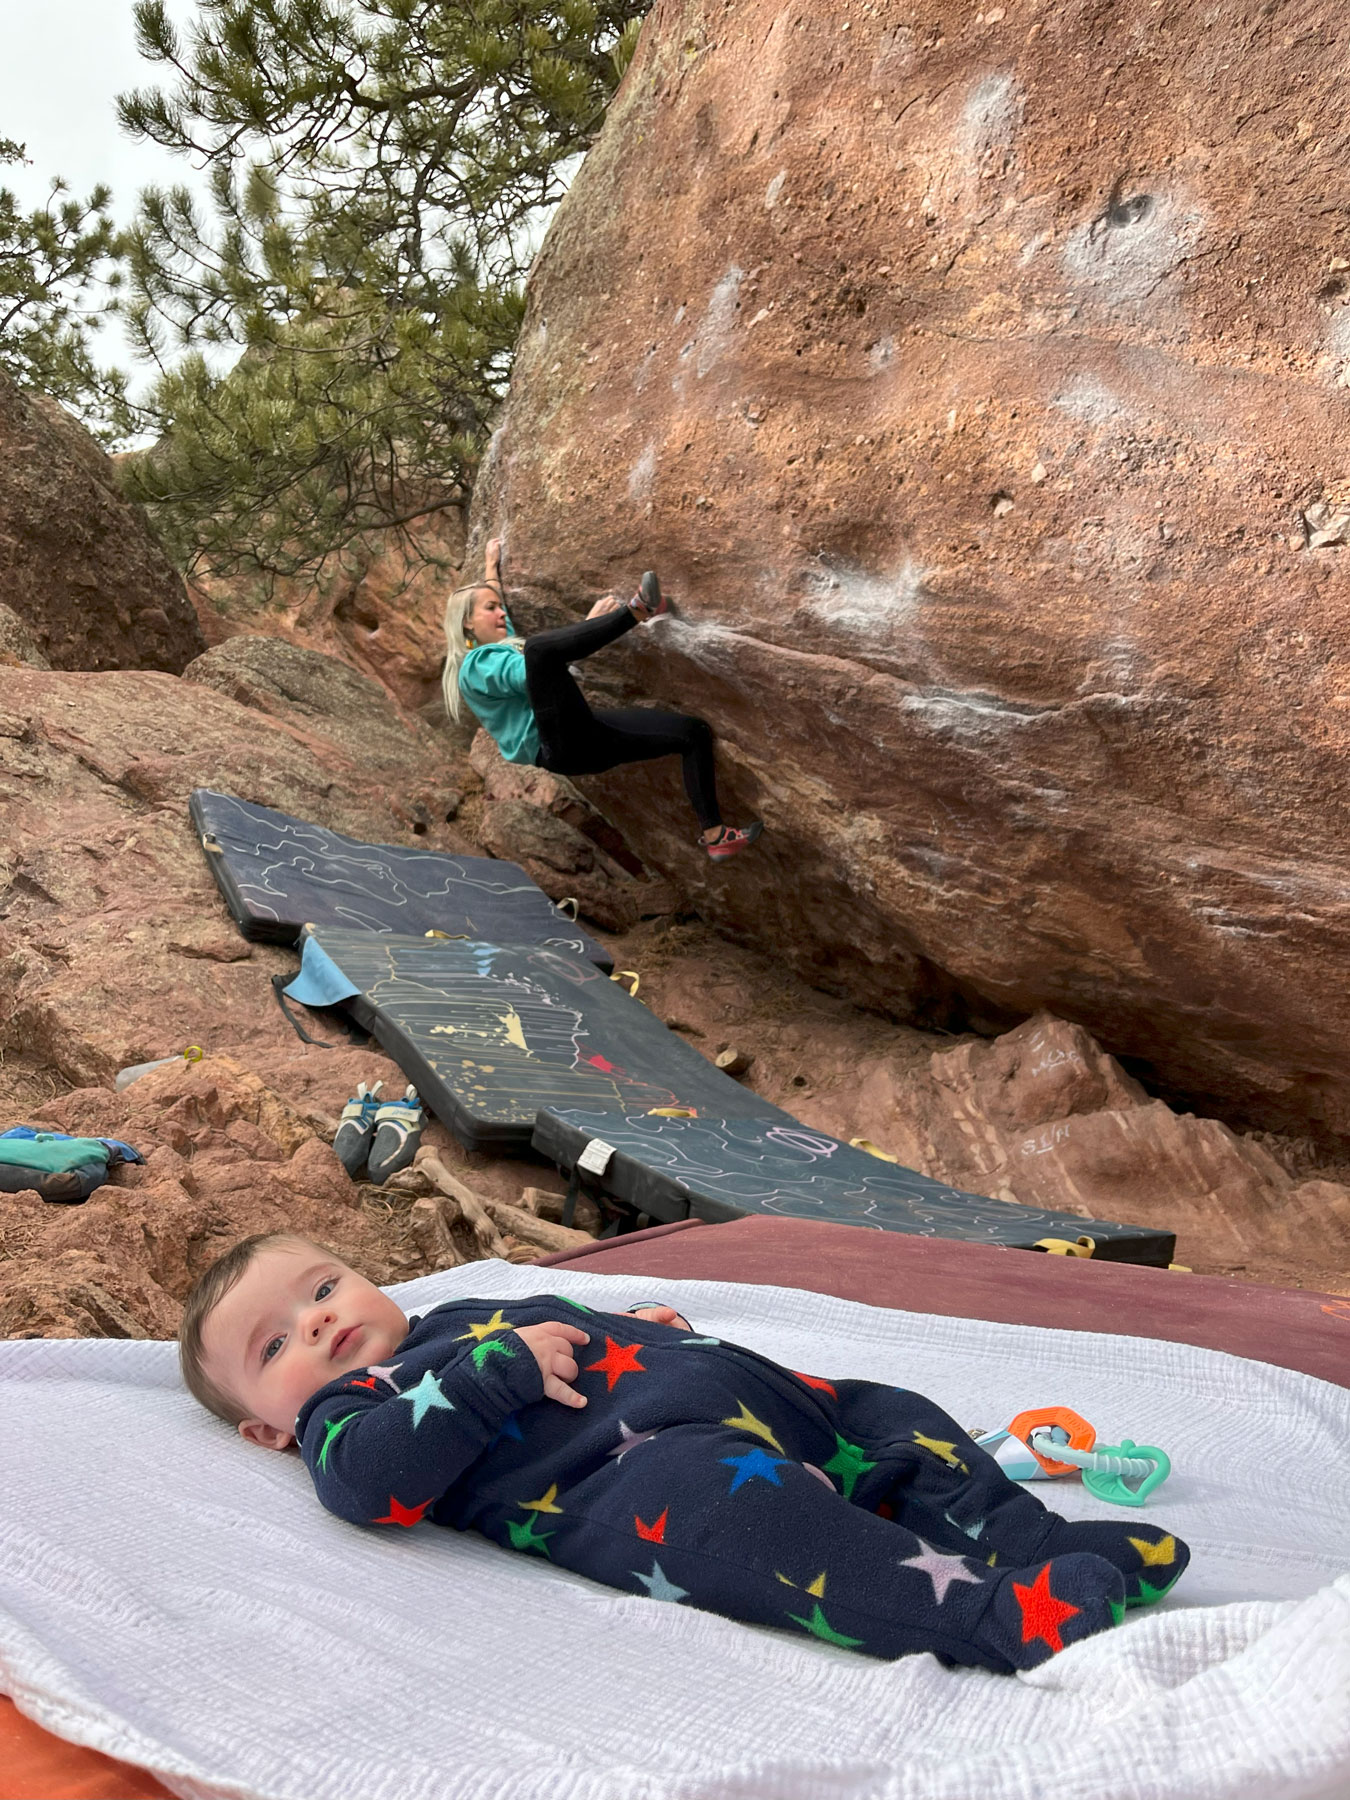 Fullerton bouldering outside, with her child on a mat